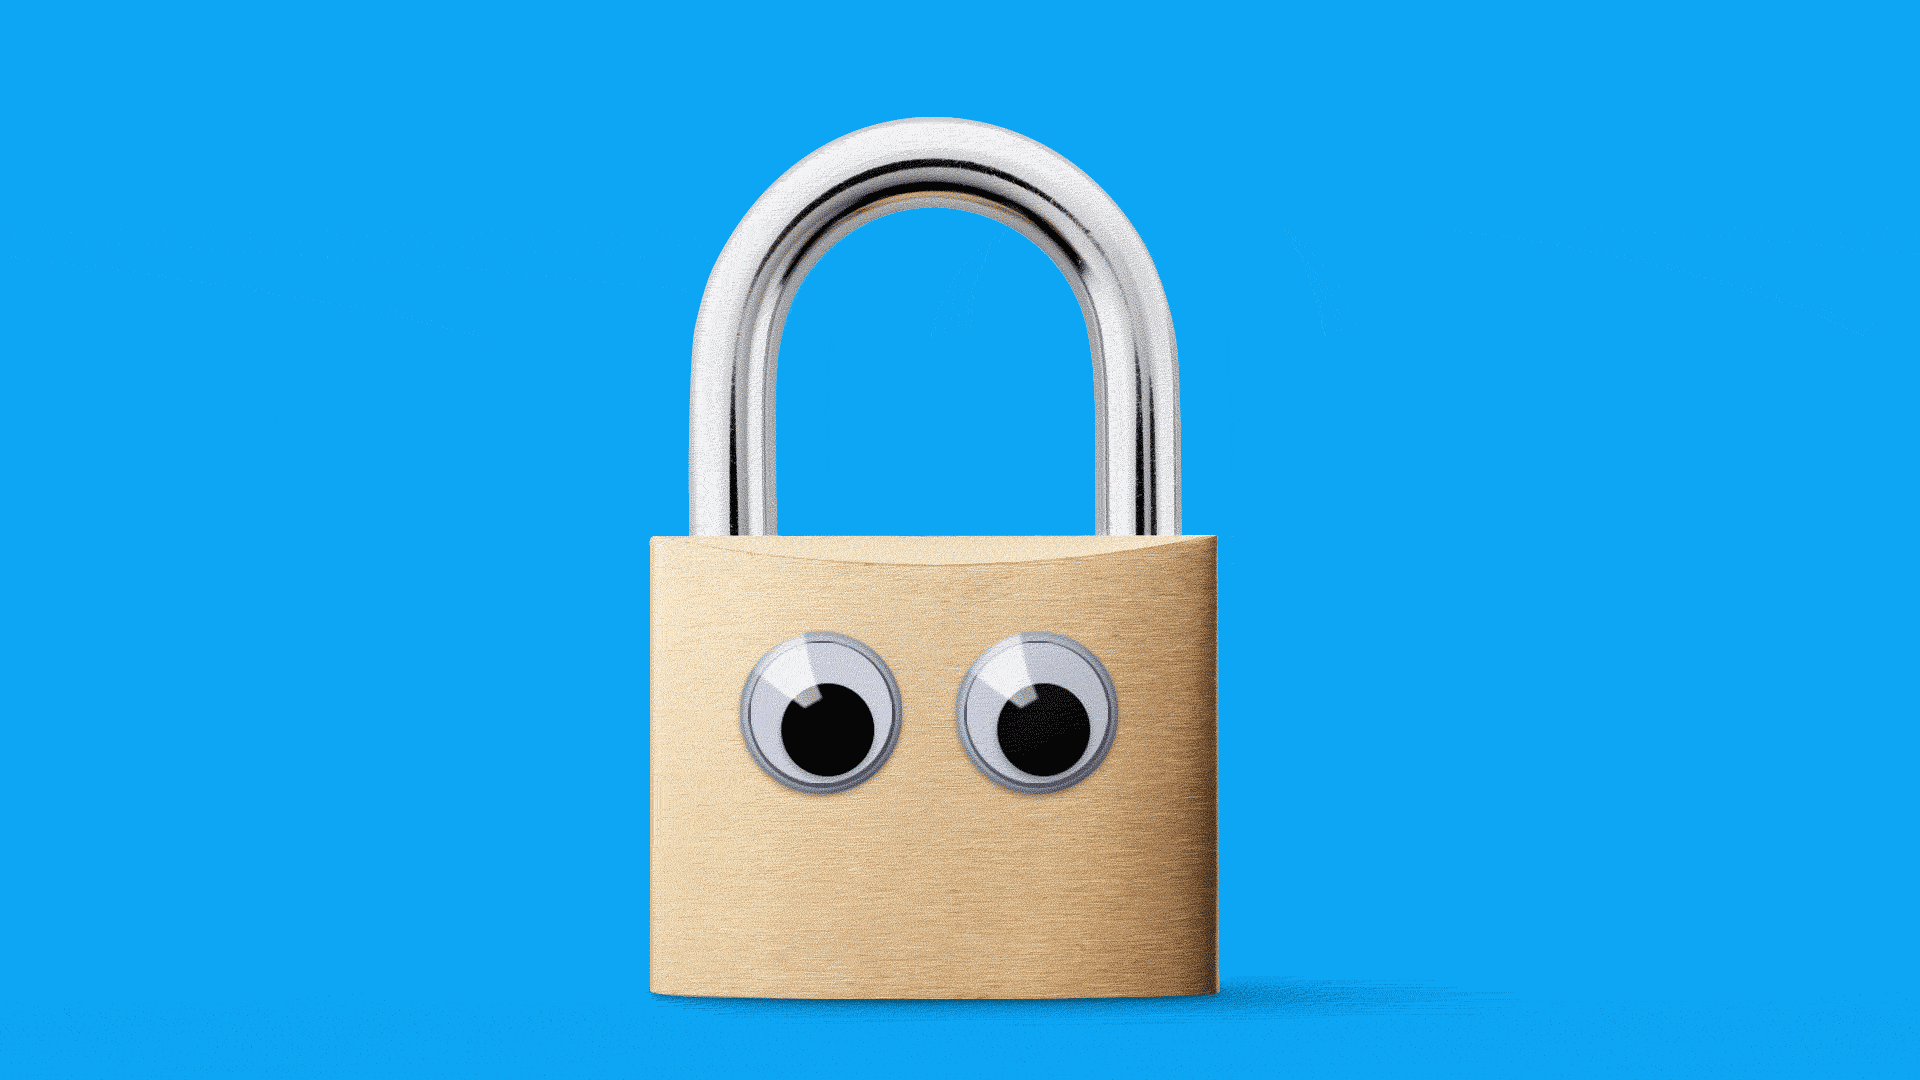 Illustration of a padlock with googly eyes